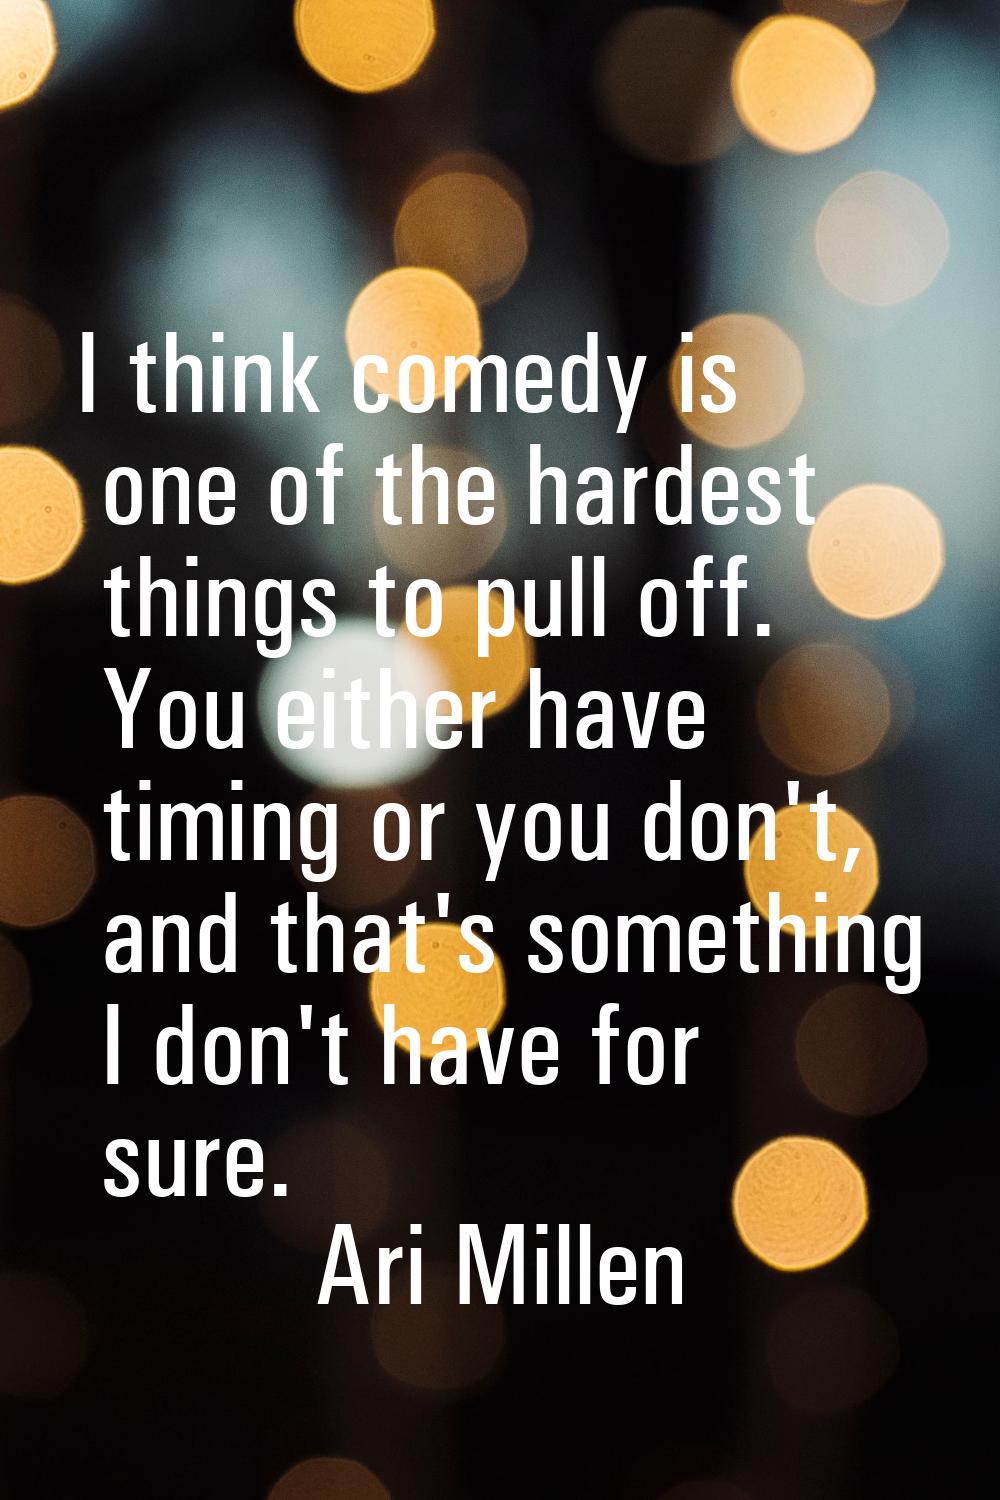 I think comedy is one of the hardest things to pull off. You either have timing or you don't, and t